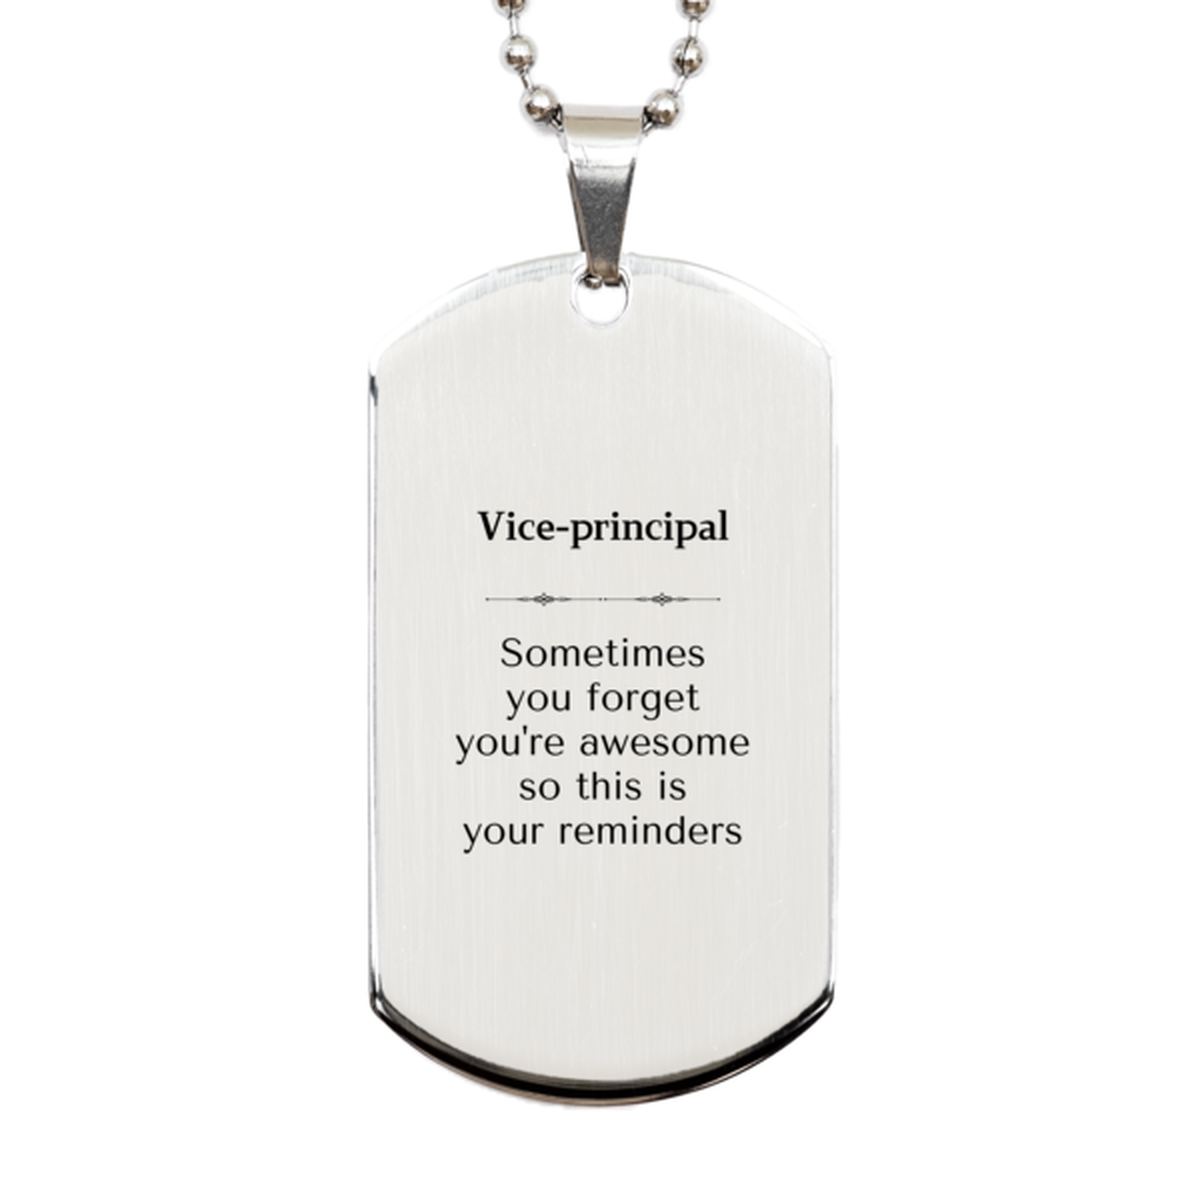 Sentimental Vice-principal Silver Dog Tag, Vice-principal Sometimes you forget you're awesome so this is your reminders, Graduation Christmas Birthday Gifts for Vice-principal, Men, Women, Coworkers